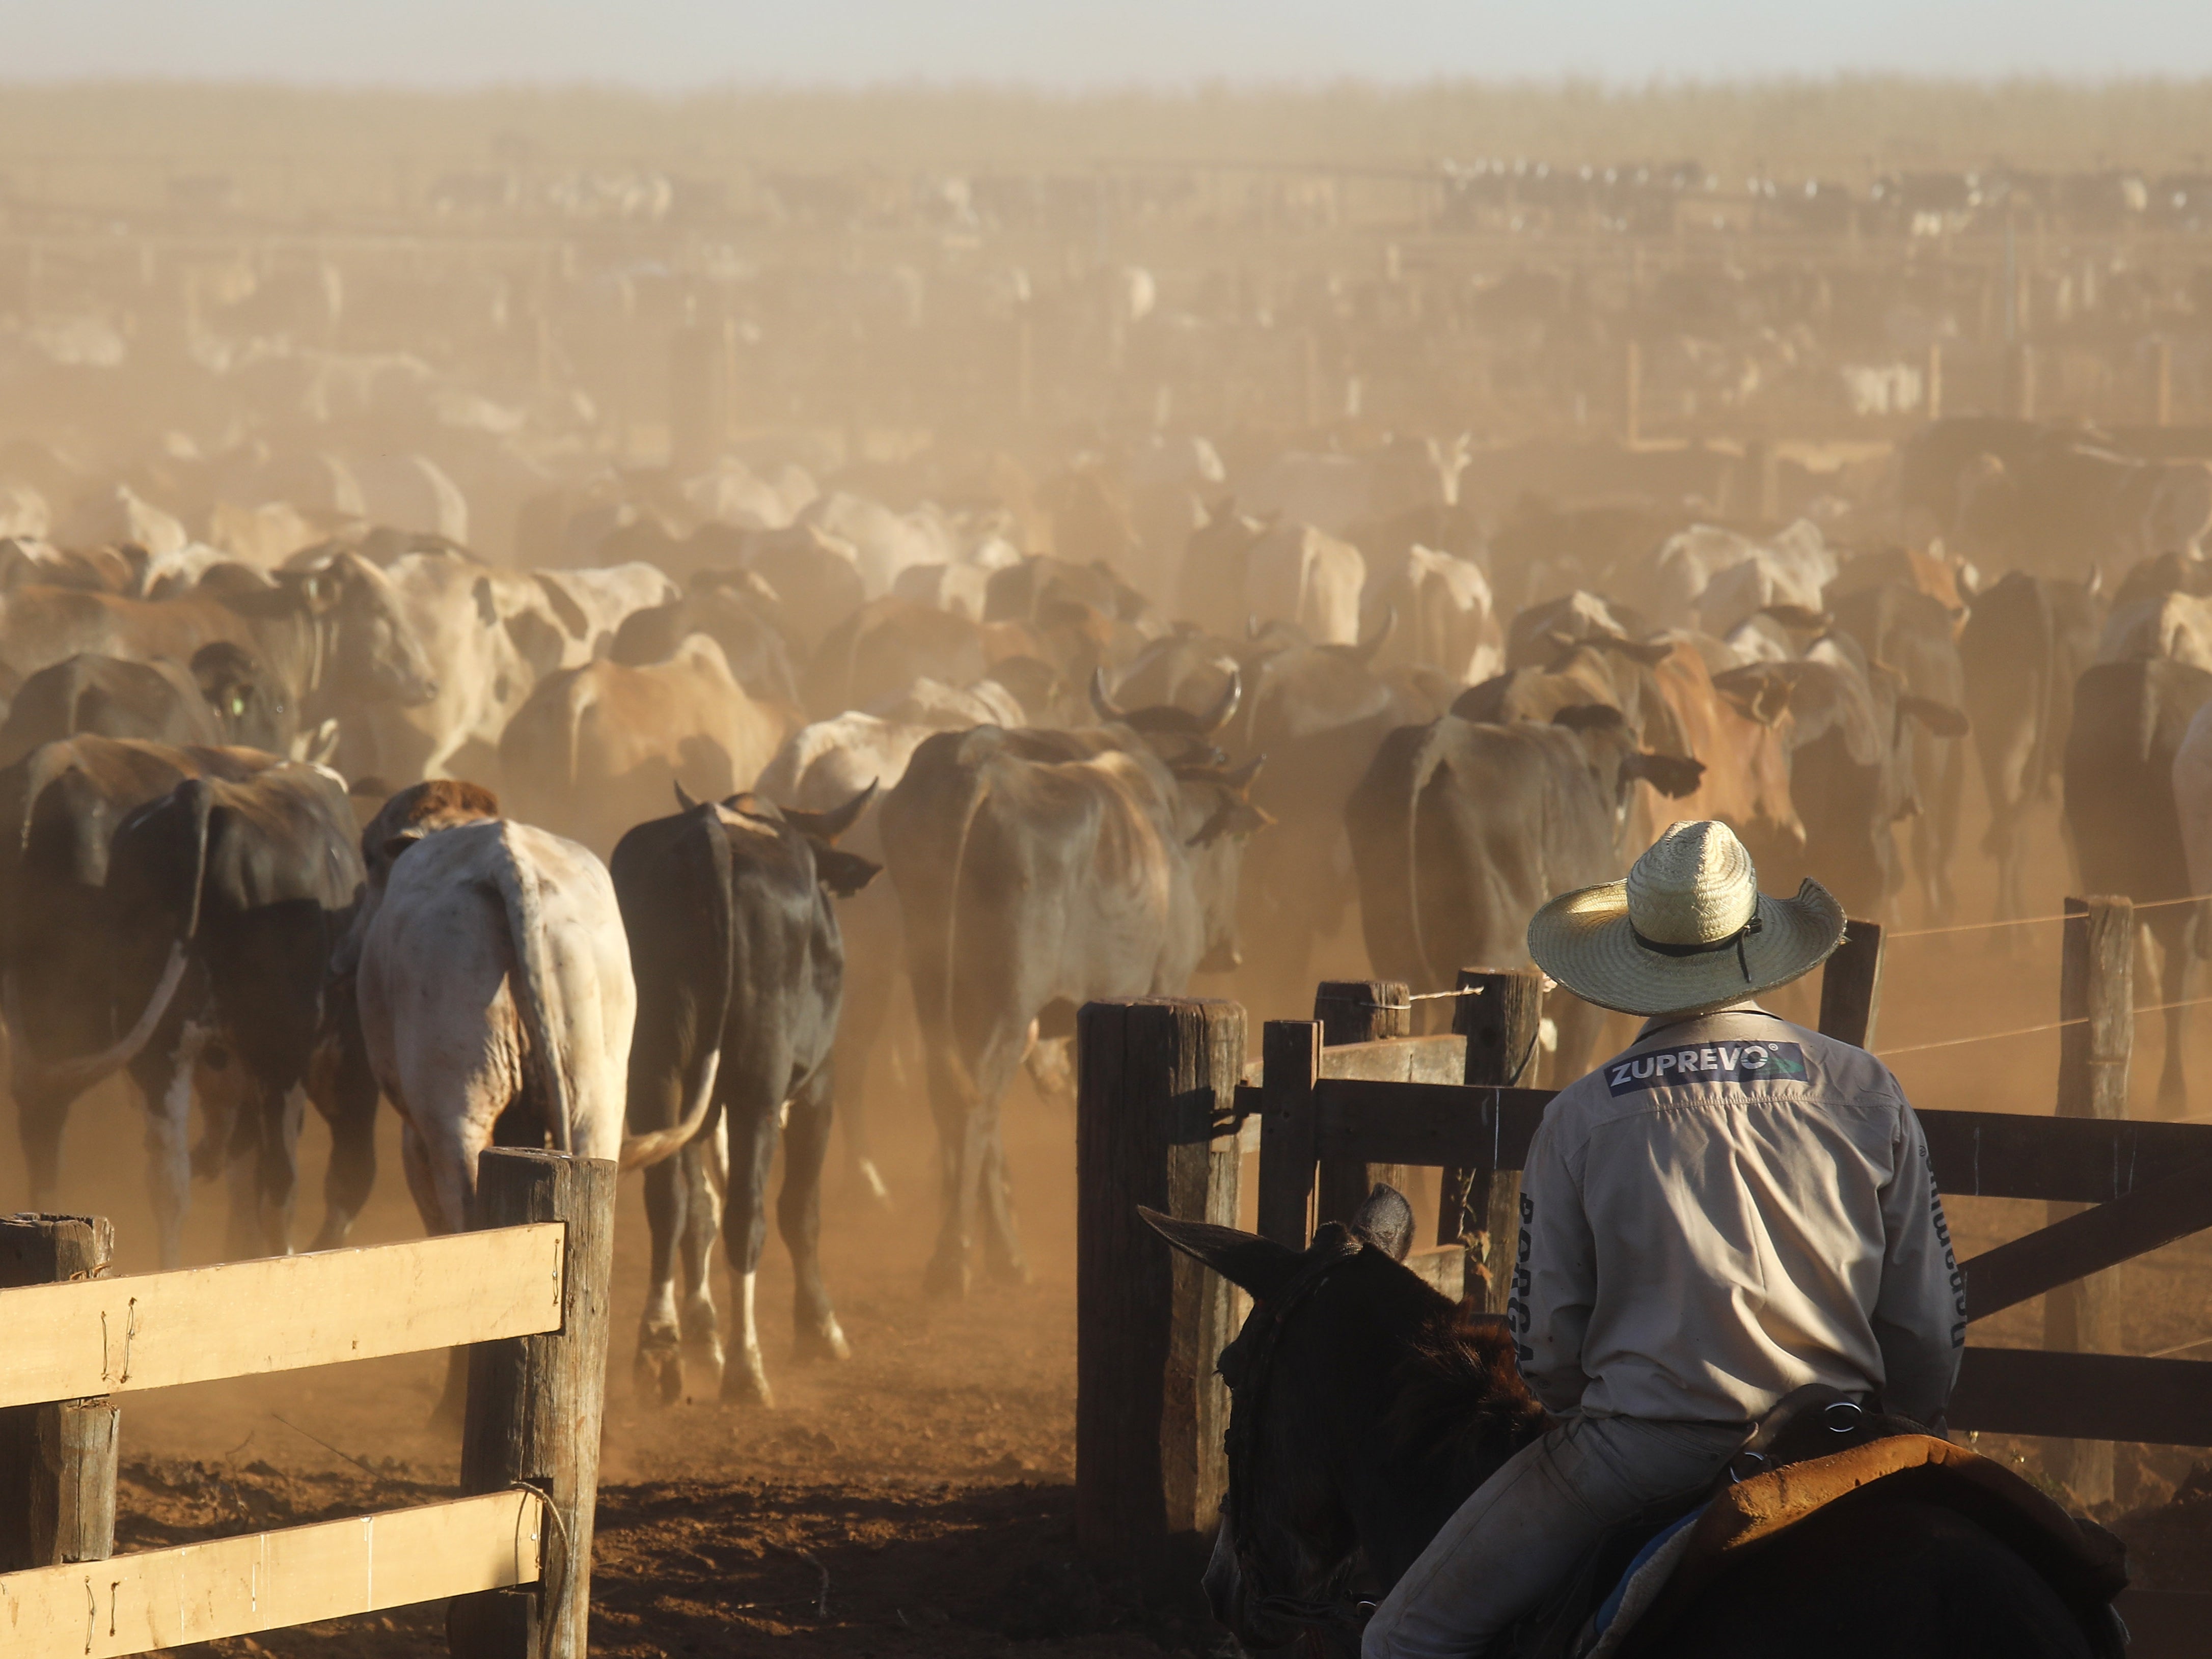 Brazil, where 175 million hectares is dedicated to raising cattle, is one of the world’s largest exporters of red meat